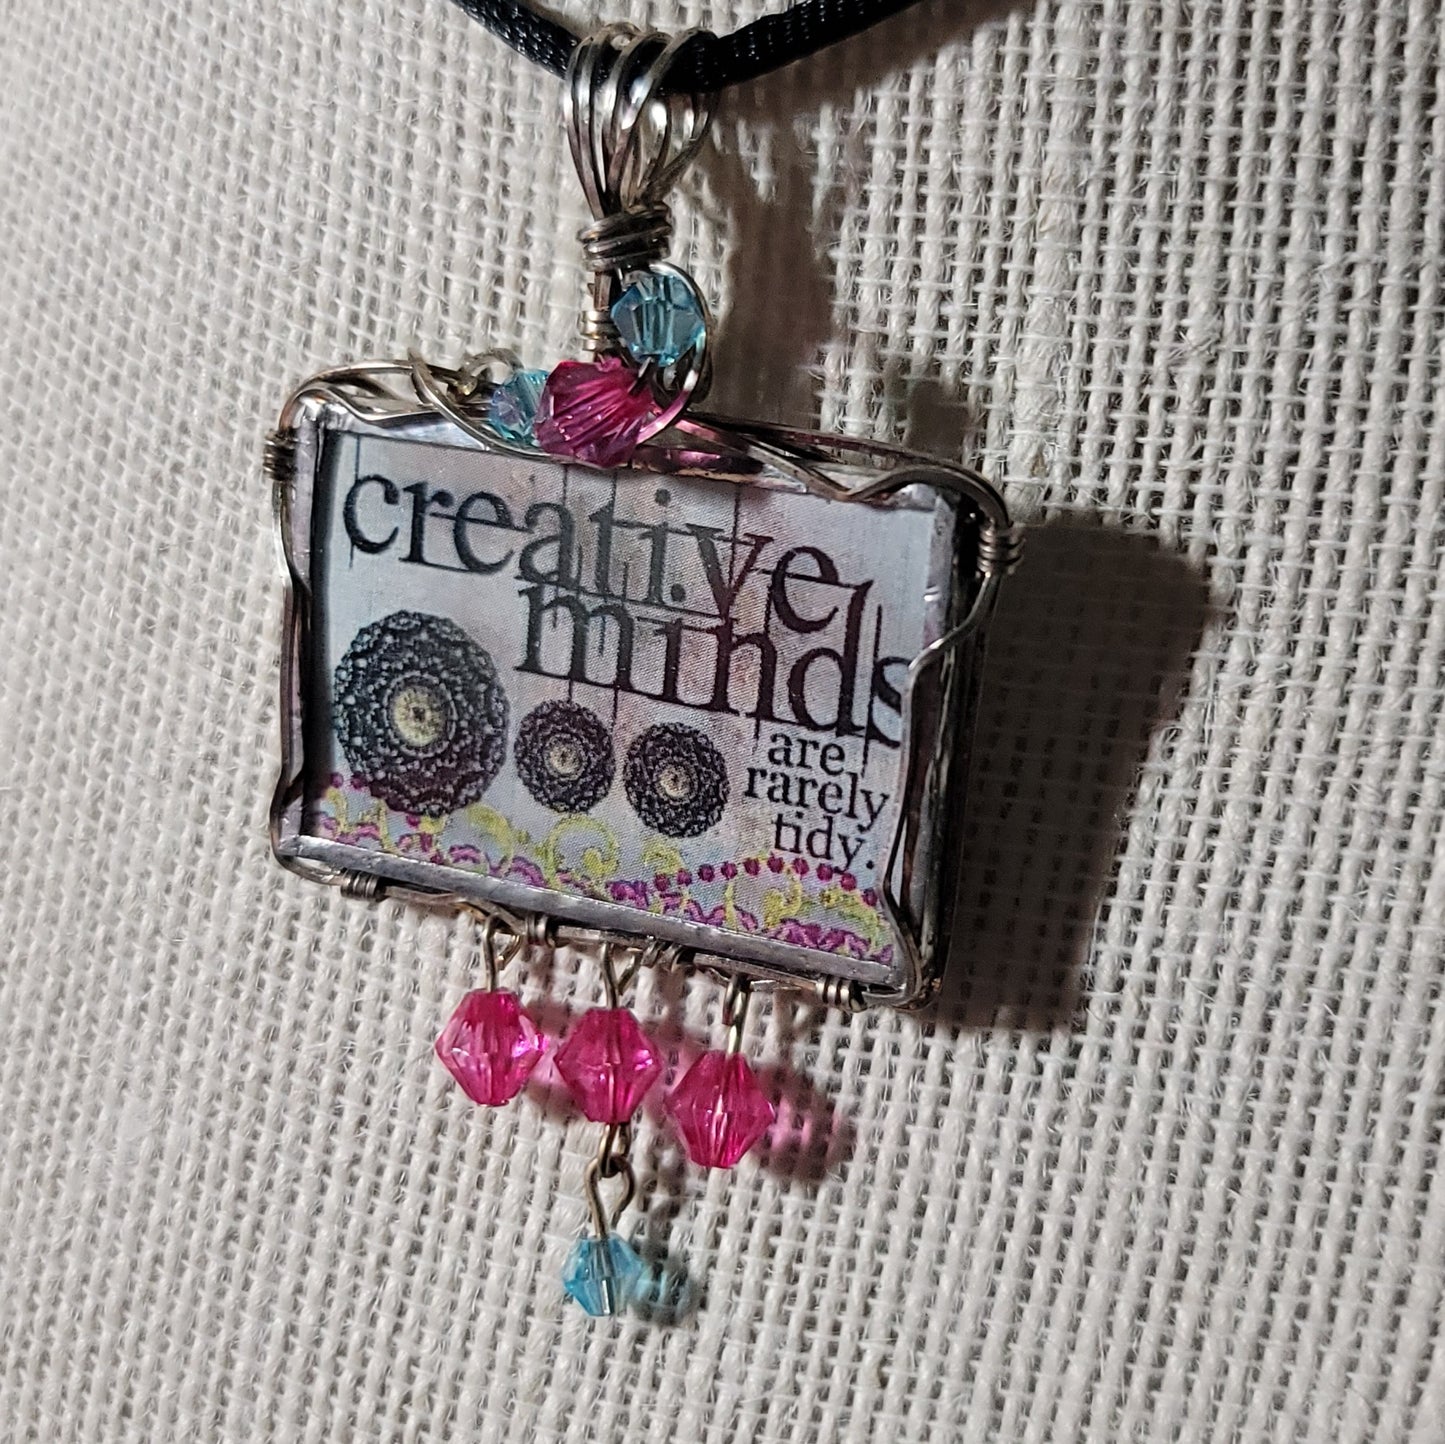 Creative Minds Are Rarely Tidy Wire Wrapped Handmade Stained-Glass Pendant